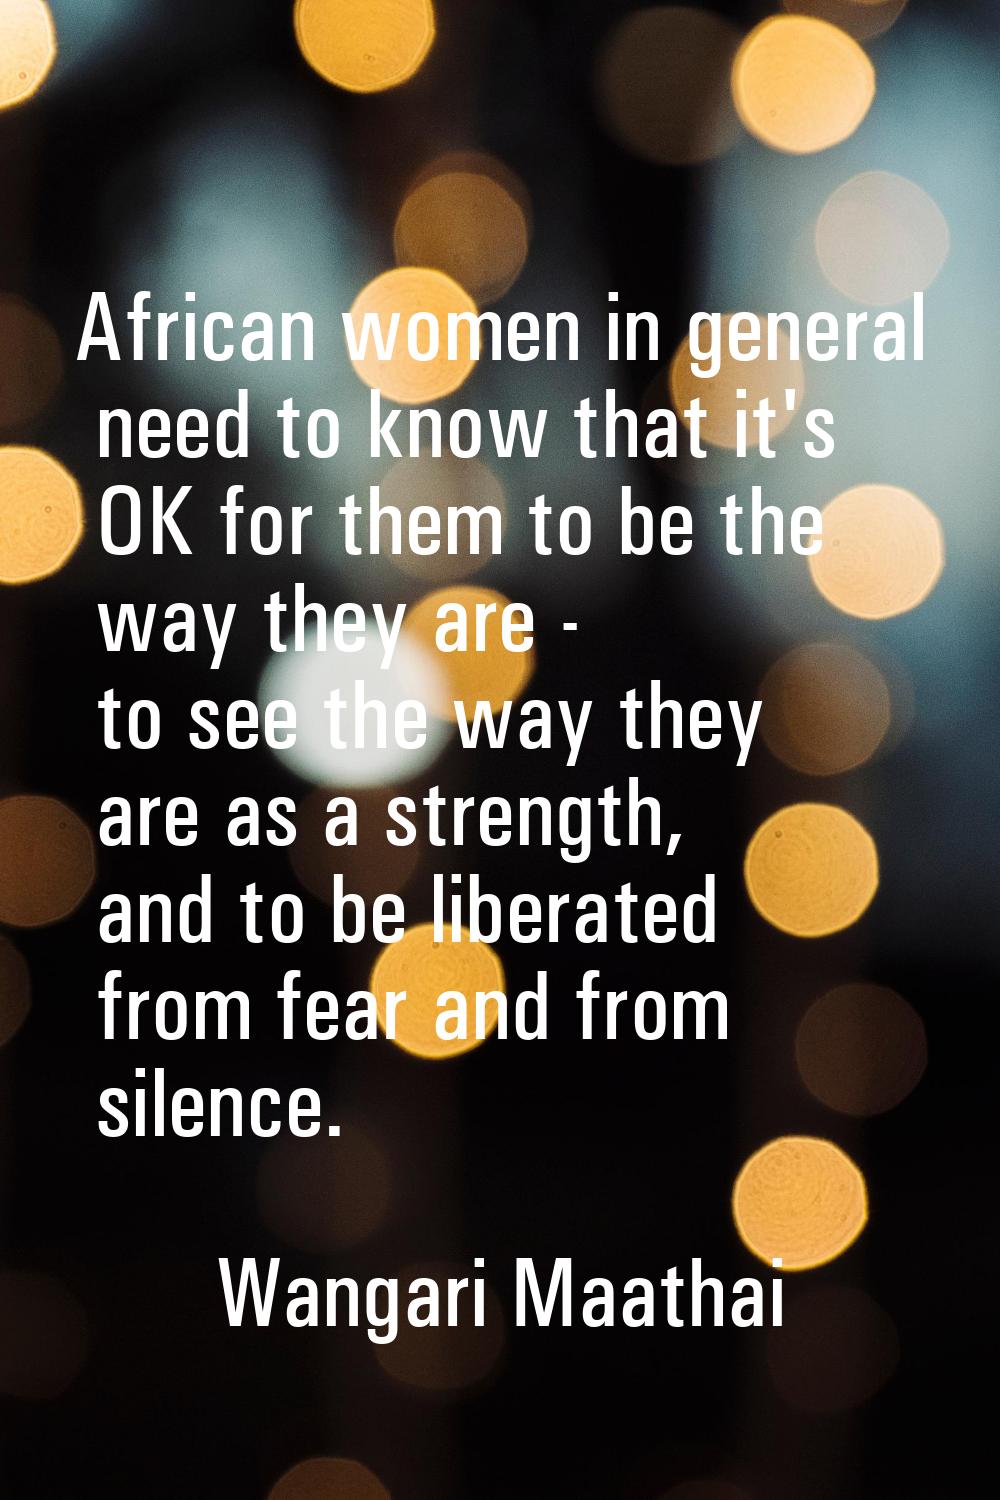 African women in general need to know that it's OK for them to be the way they are - to see the way